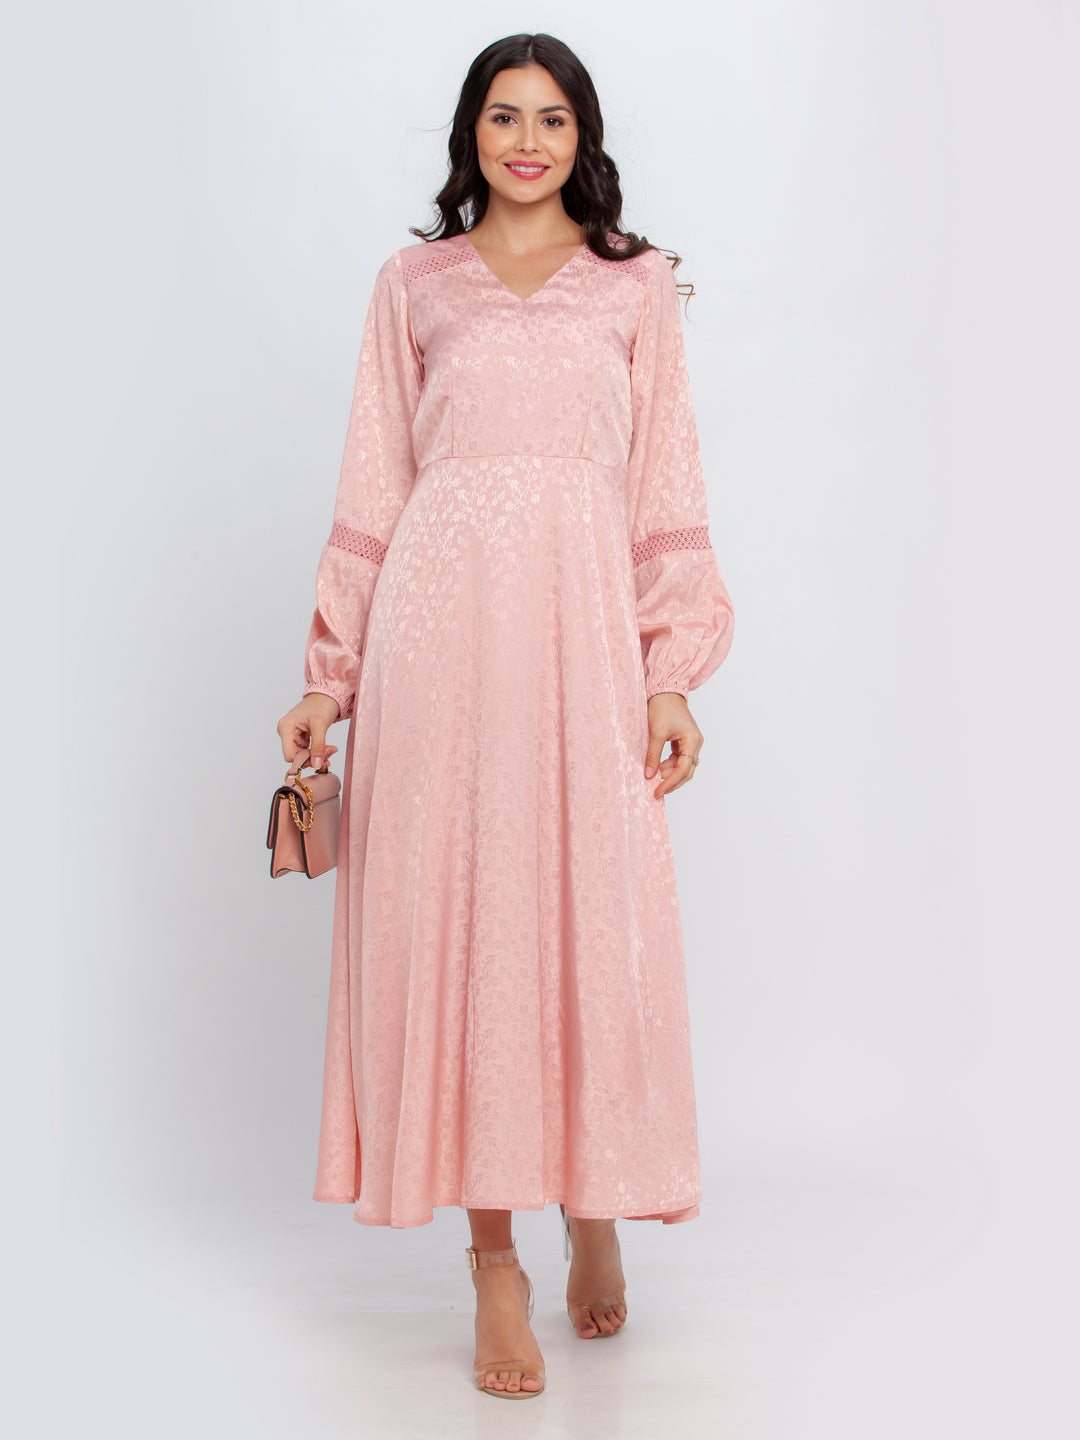 Pink Printed Maxi Dress For Women